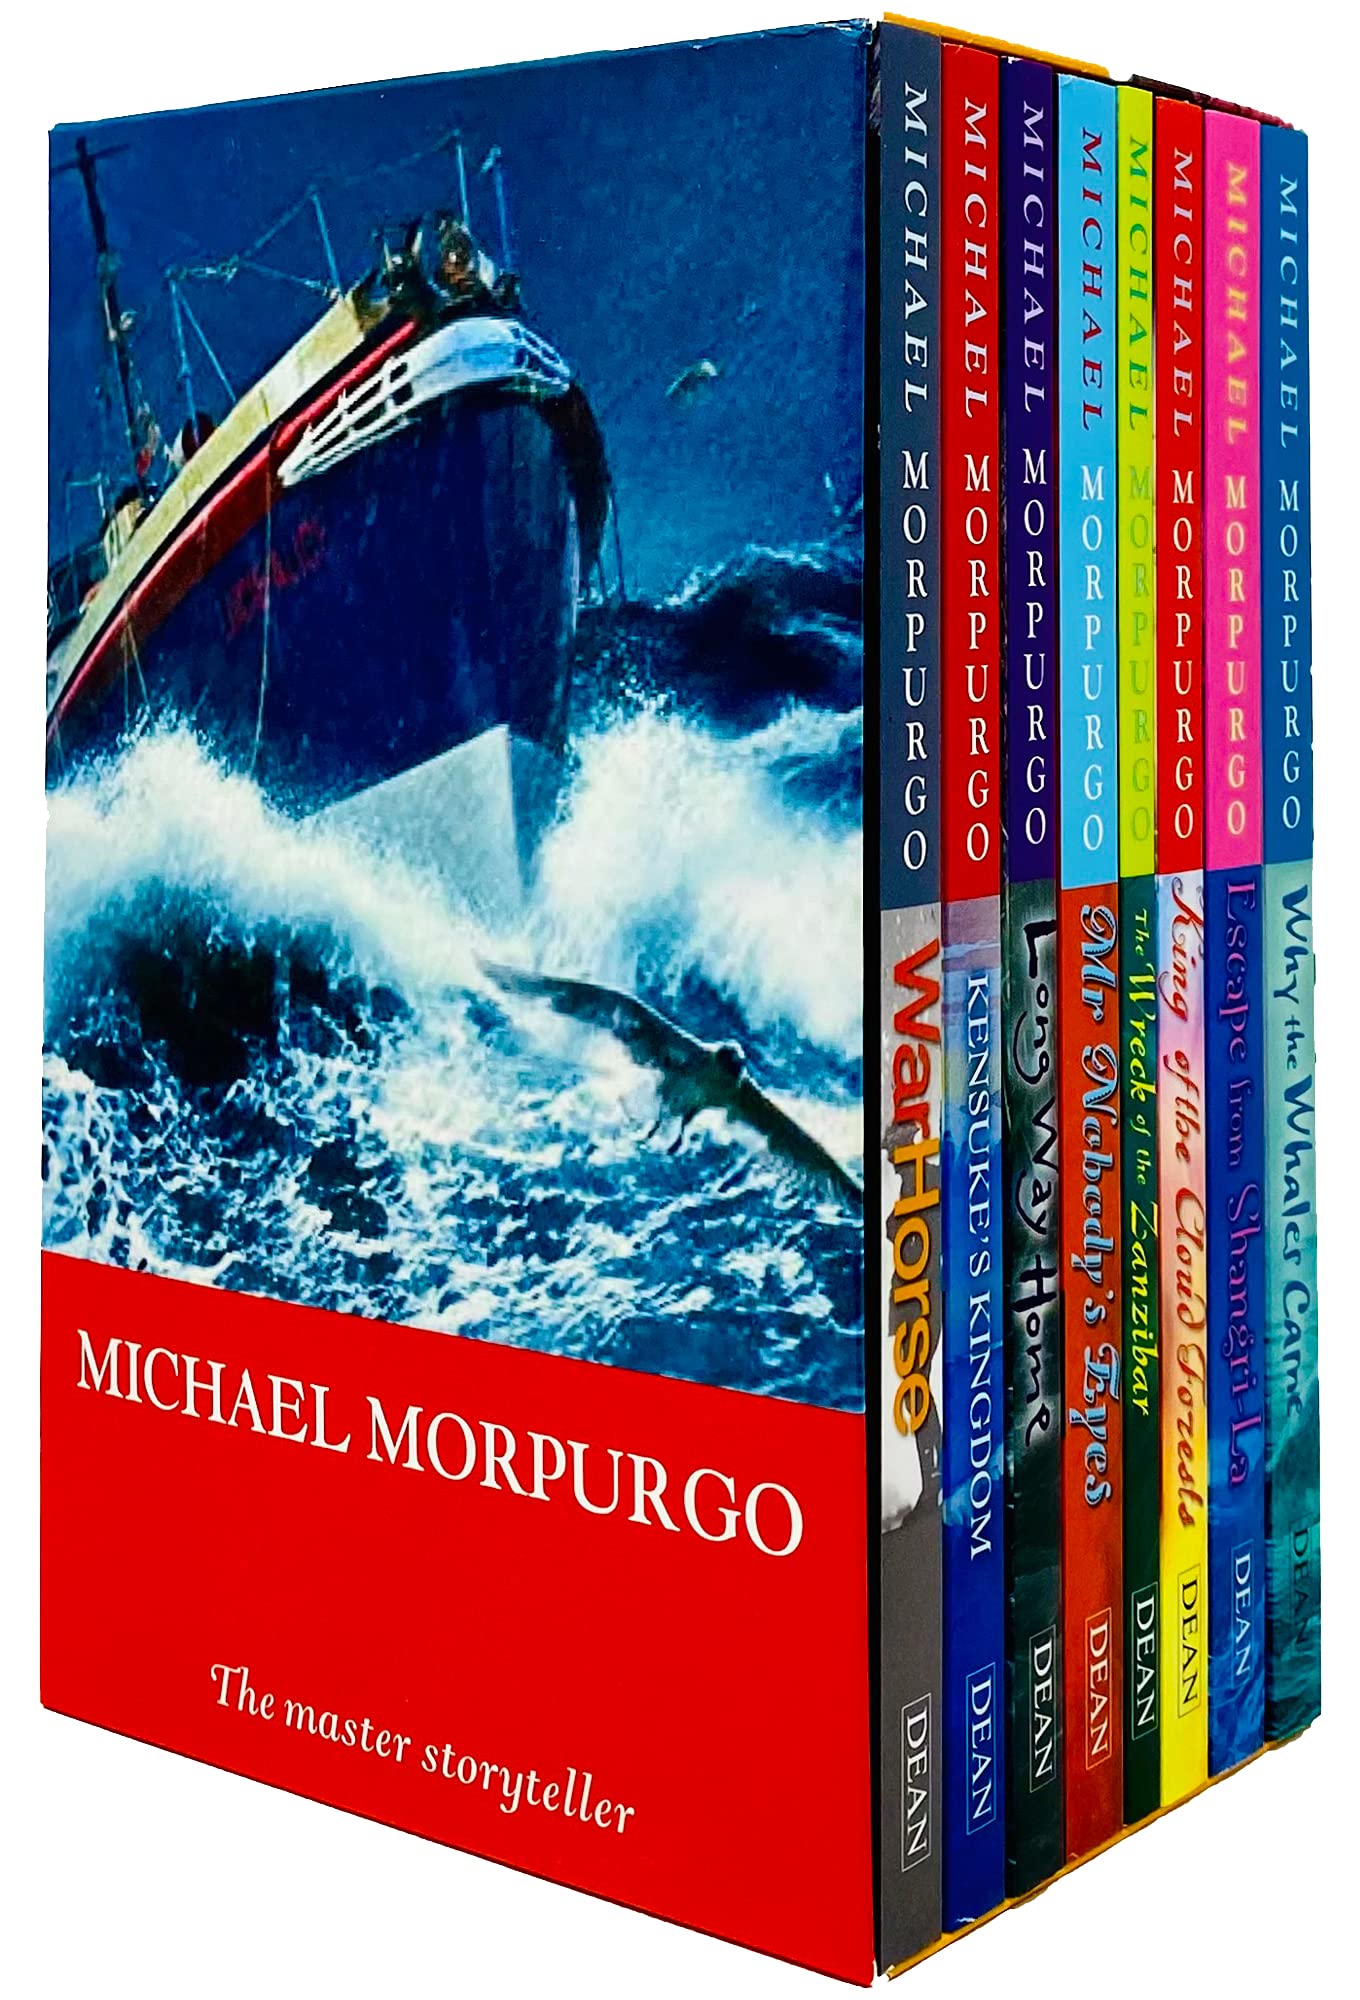 Michael Morpurgo Collection Childrens 8 Books Set Boxed (King of the Cloud Forests, Escape from Shangri-La, Why the Whales Came, Kensuke's Kingdom, Long Way Home, The Wreck of the Zanzibar, Mr Nobody's Eyes and War Horse)